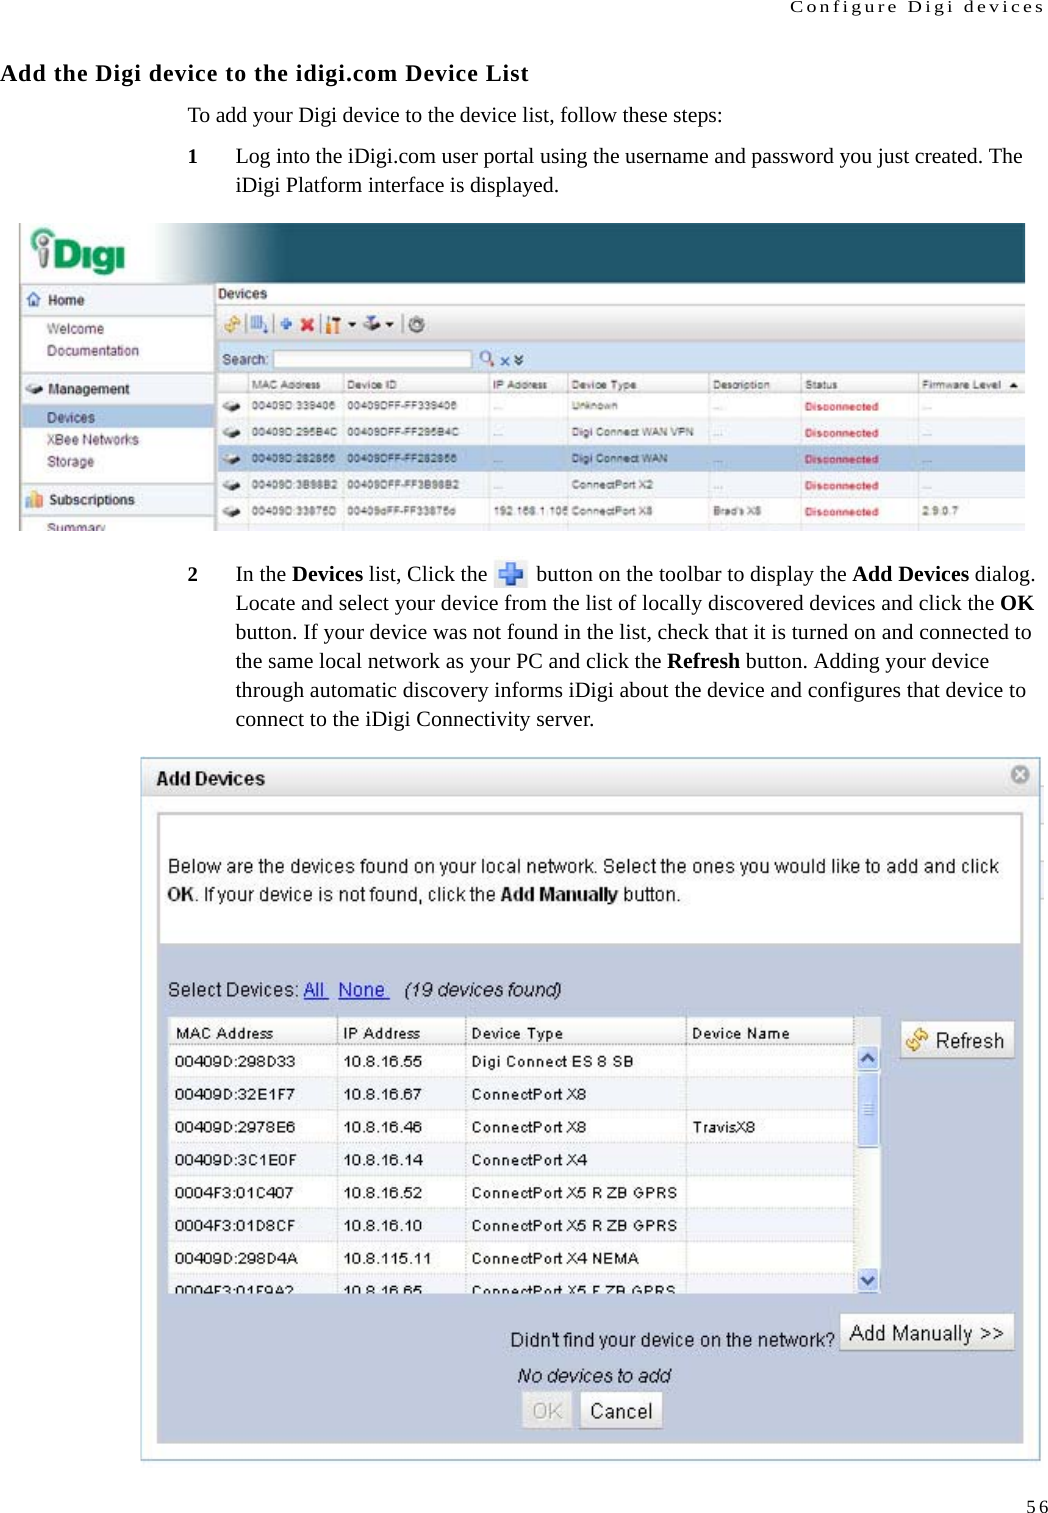 Configure Digi devices56Add the Digi device to the idigi.com Device List To add your Digi device to the device list, follow these steps:1Log into the iDigi.com user portal using the username and password you just created. The iDigi Platform interface is displayed. 2In the Devices list, Click the   button on the toolbar to display the Add Devices dialog. Locate and select your device from the list of locally discovered devices and click the OK button. If your device was not found in the list, check that it is turned on and connected to the same local network as your PC and click the Refresh button. Adding your device through automatic discovery informs iDigi about the device and configures that device to connect to the iDigi Connectivity server.